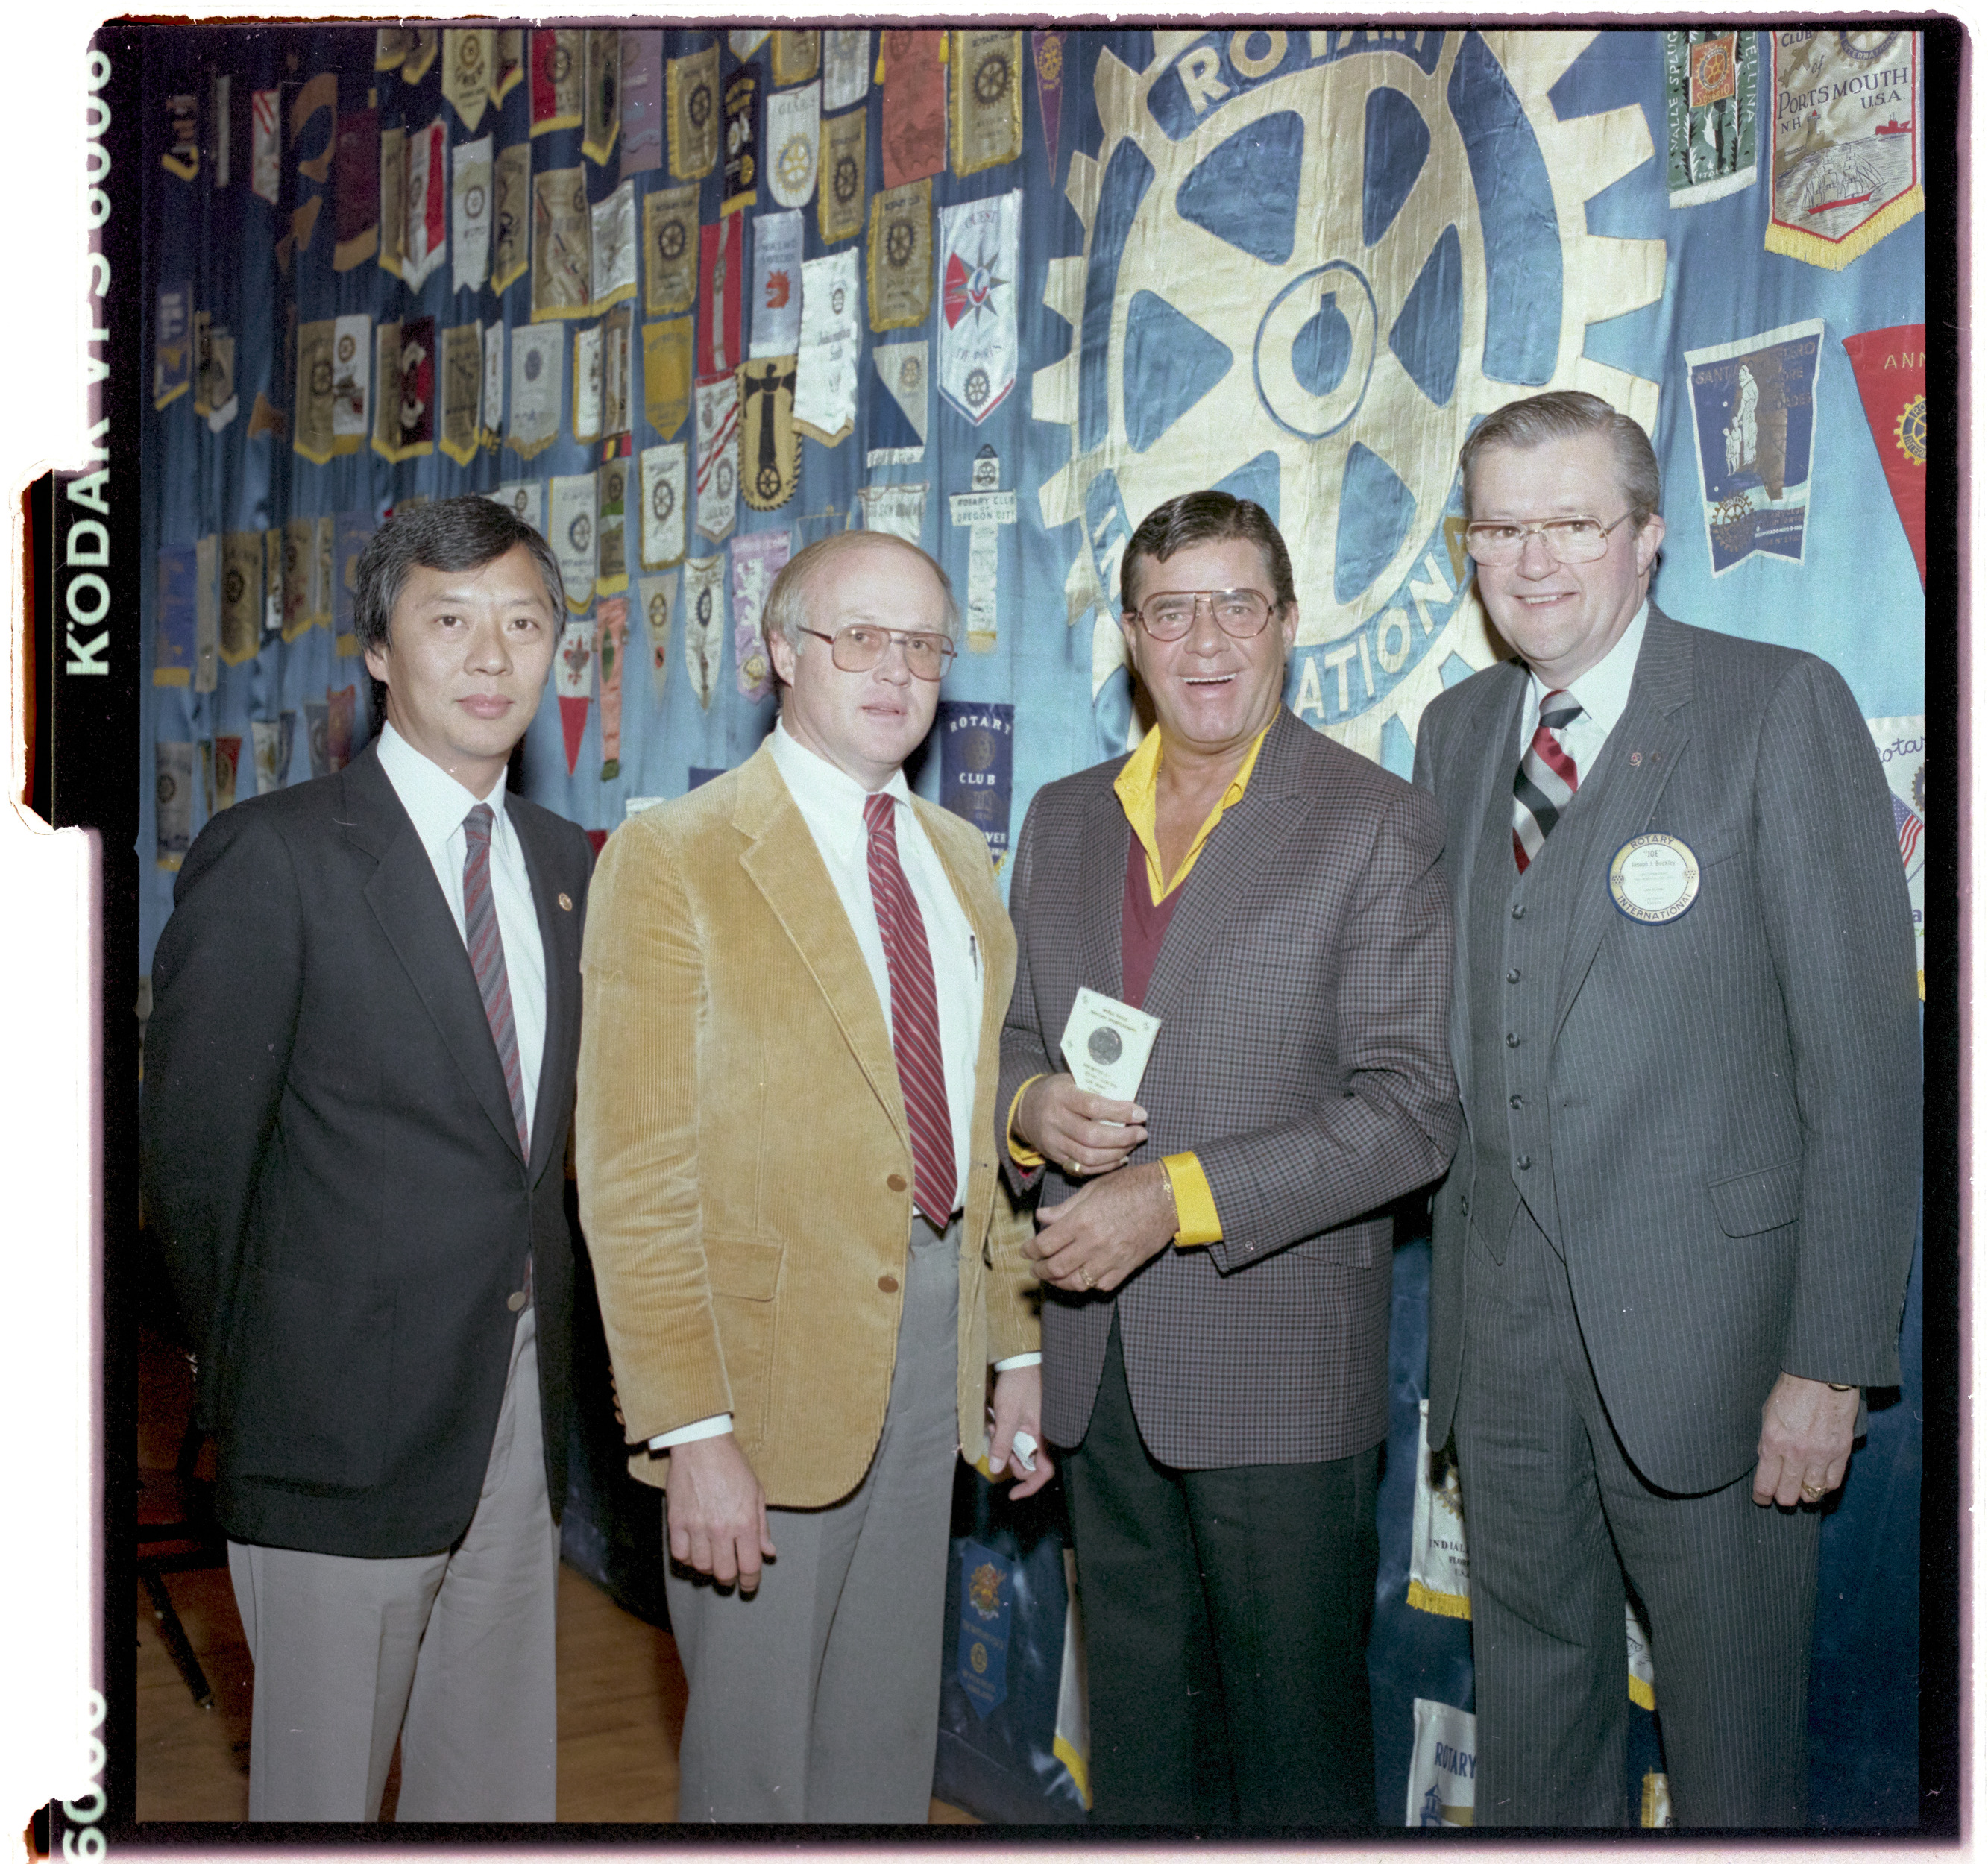 Photographs of Las Vegas Rotary Jerry Lewis, image 02